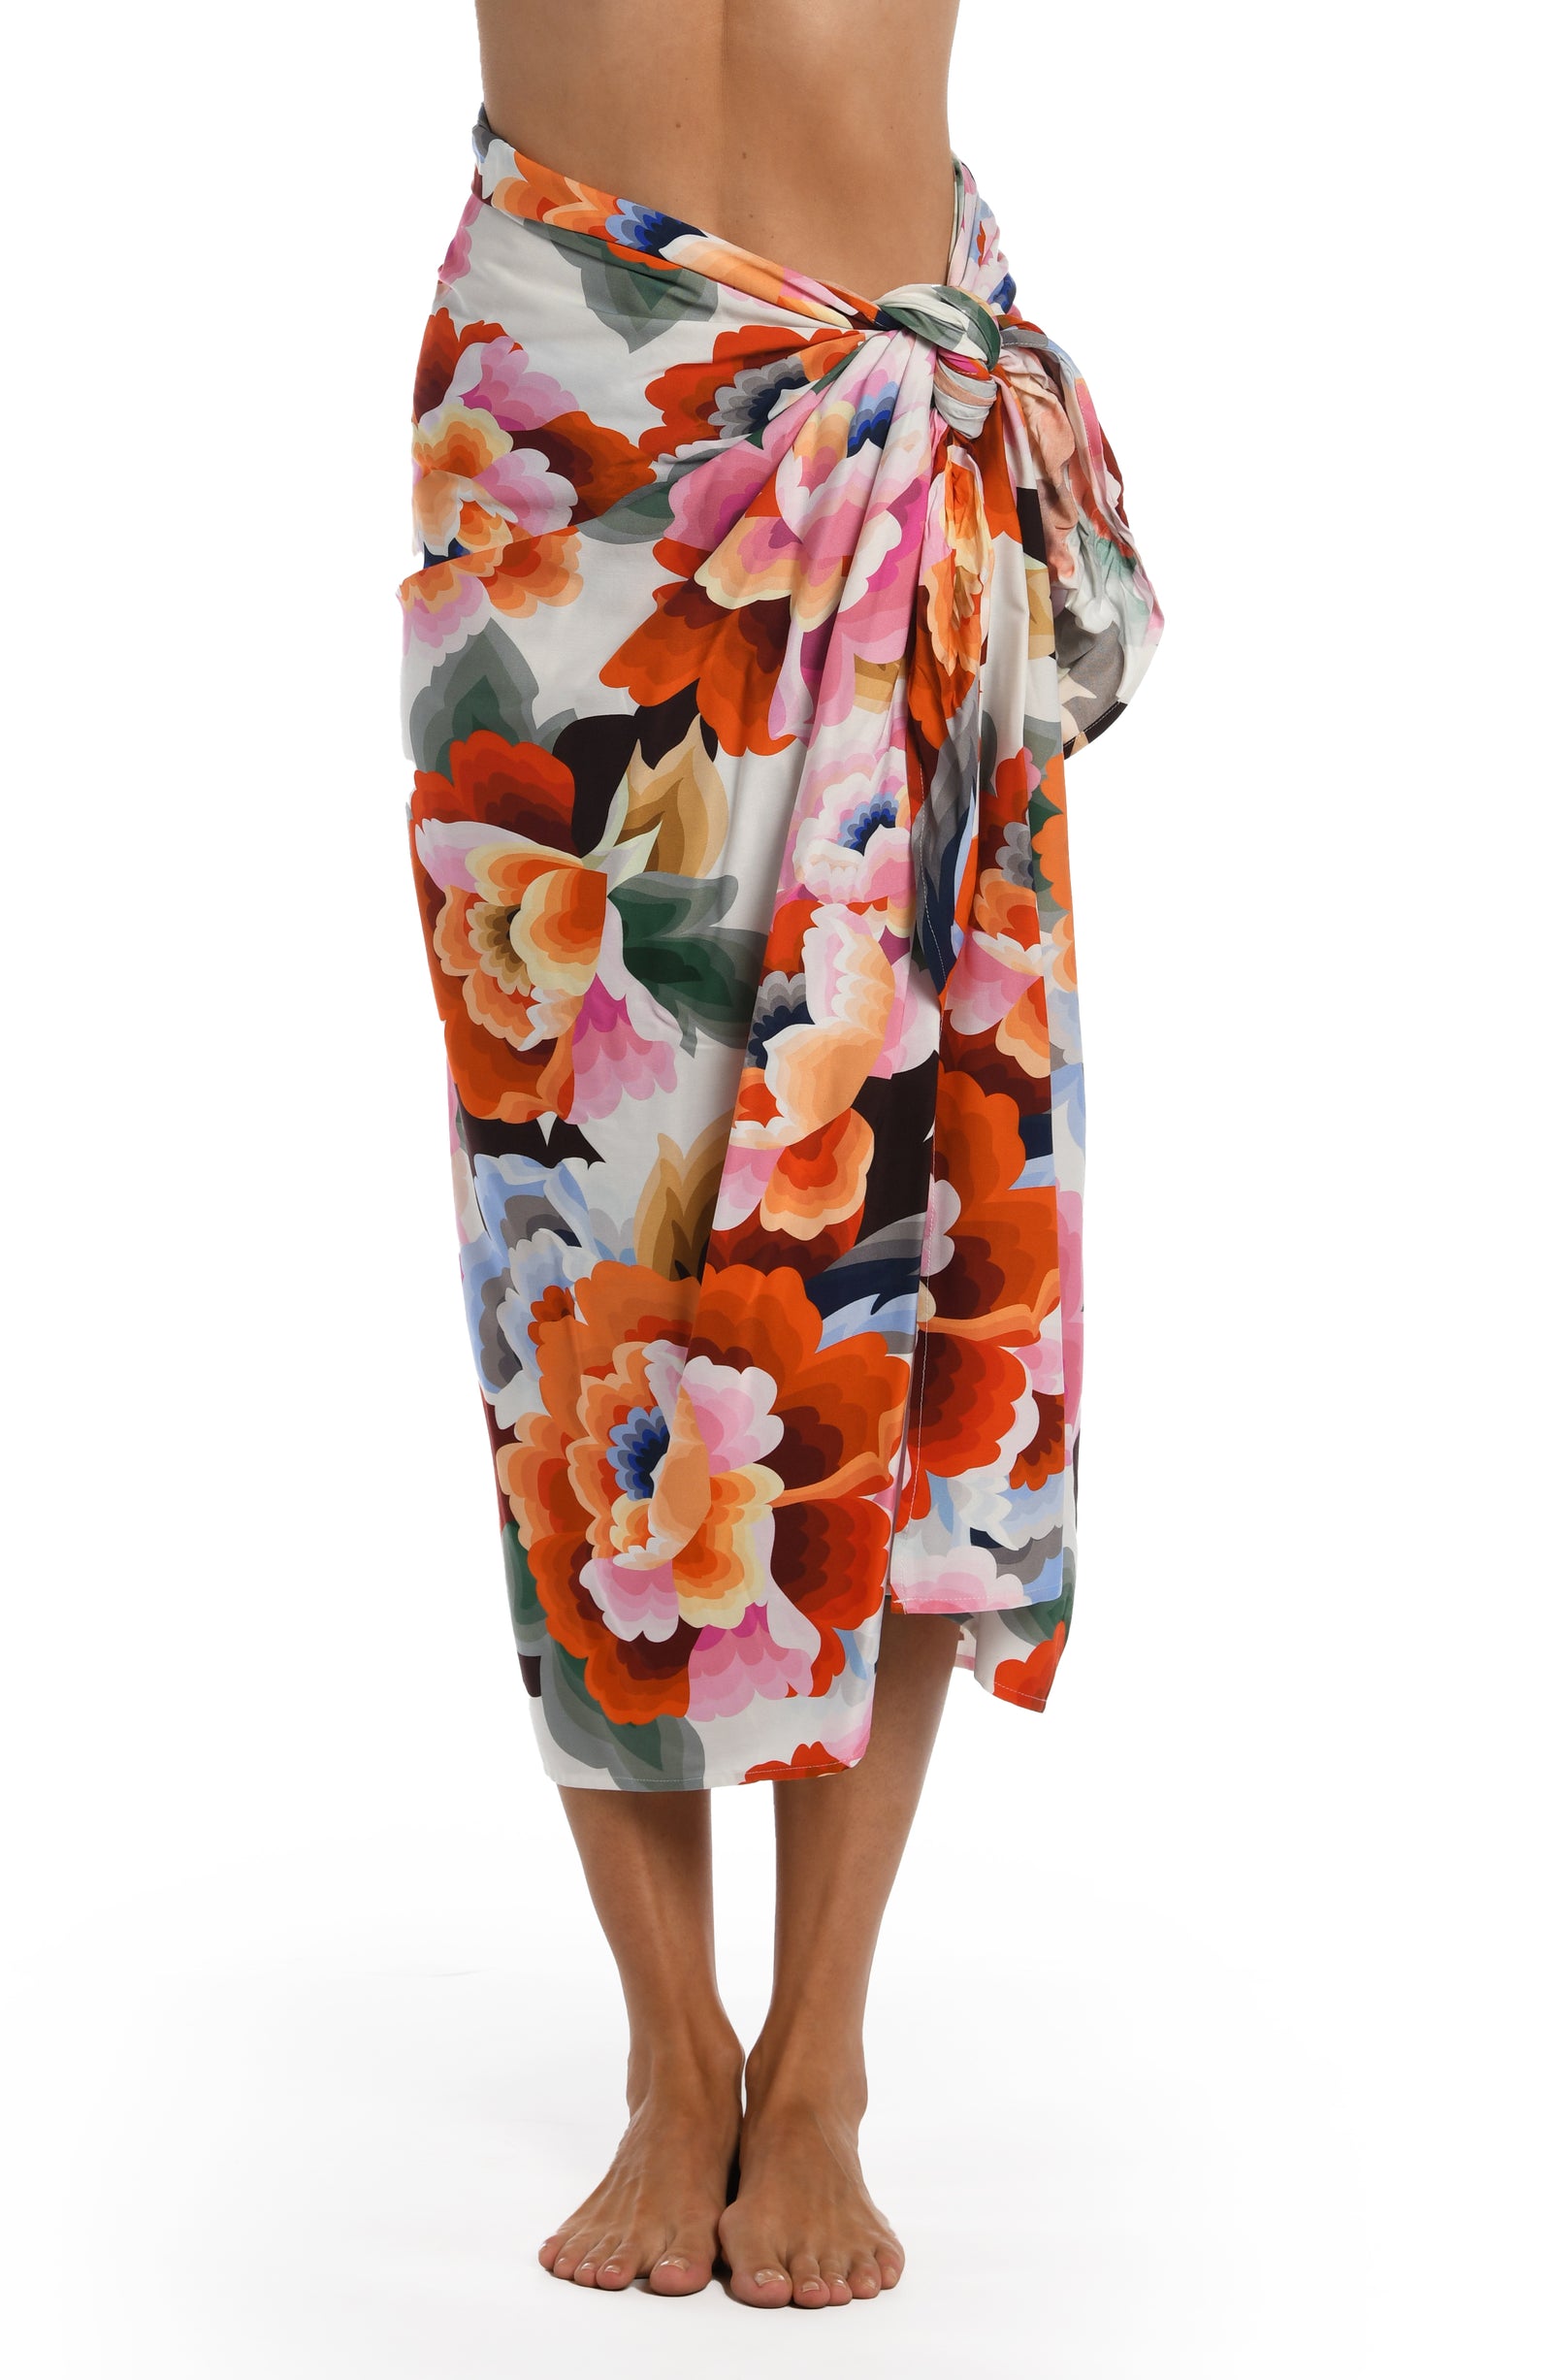 Floral Rhythm Collection  Pareo - One Size Skirt  Fabric Content: 100% Rayon Crepe  Product#: LB3VE40